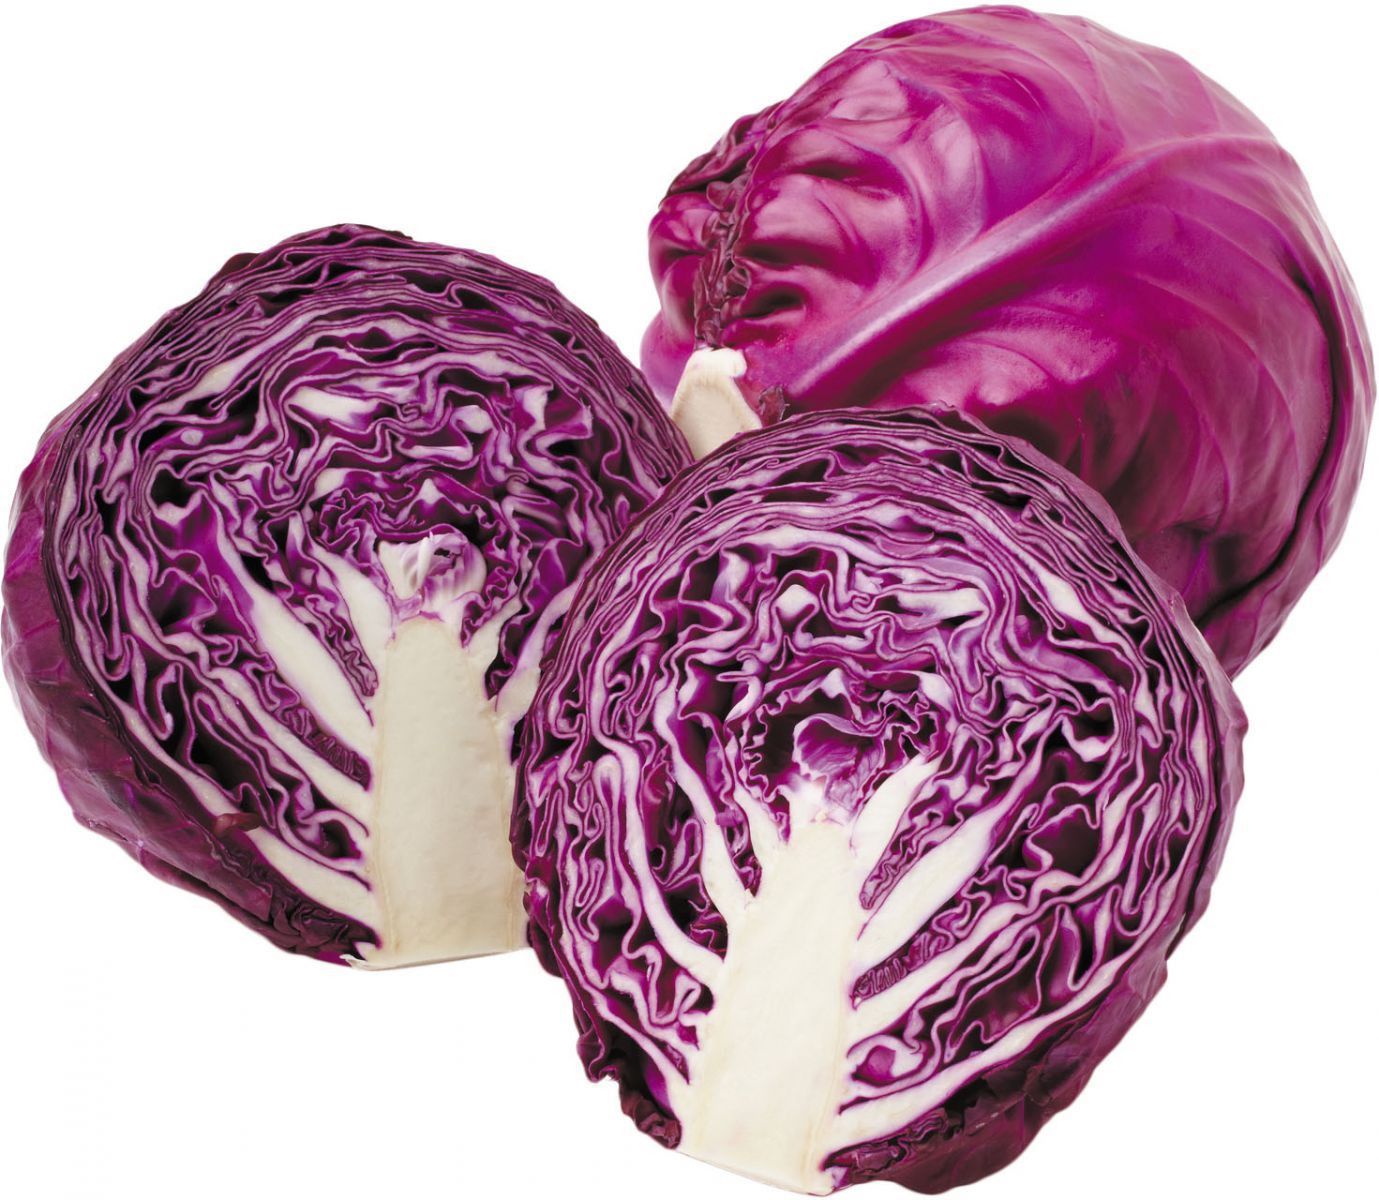 Surprising Food For Rabbits: Red Cabbage Revealed!